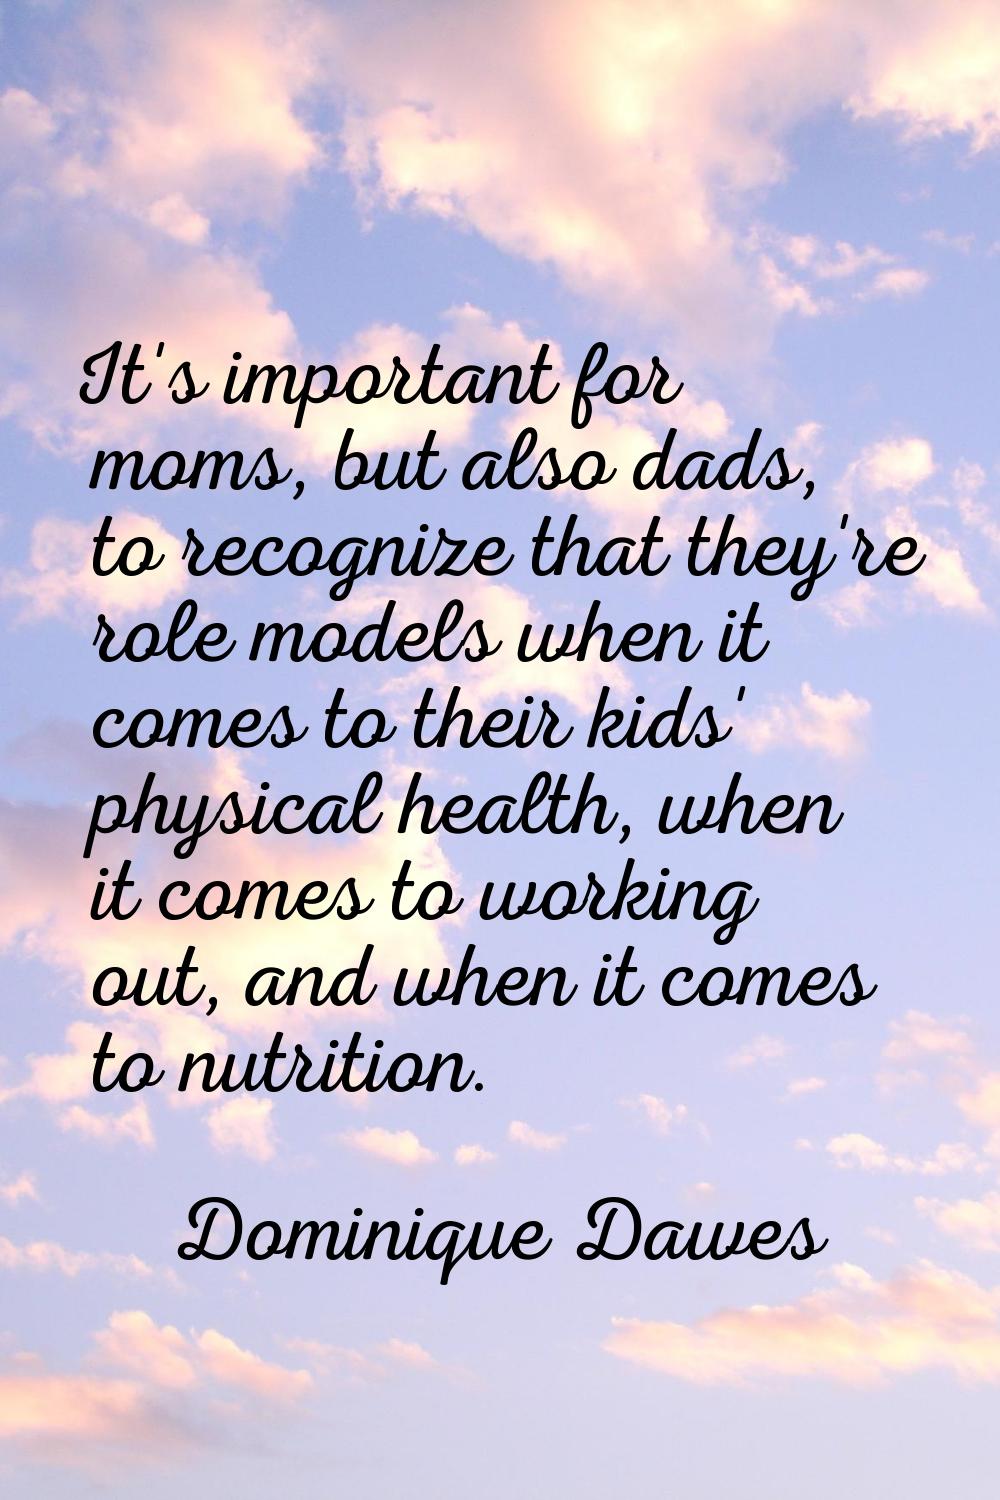 It's important for moms, but also dads, to recognize that they're role models when it comes to thei